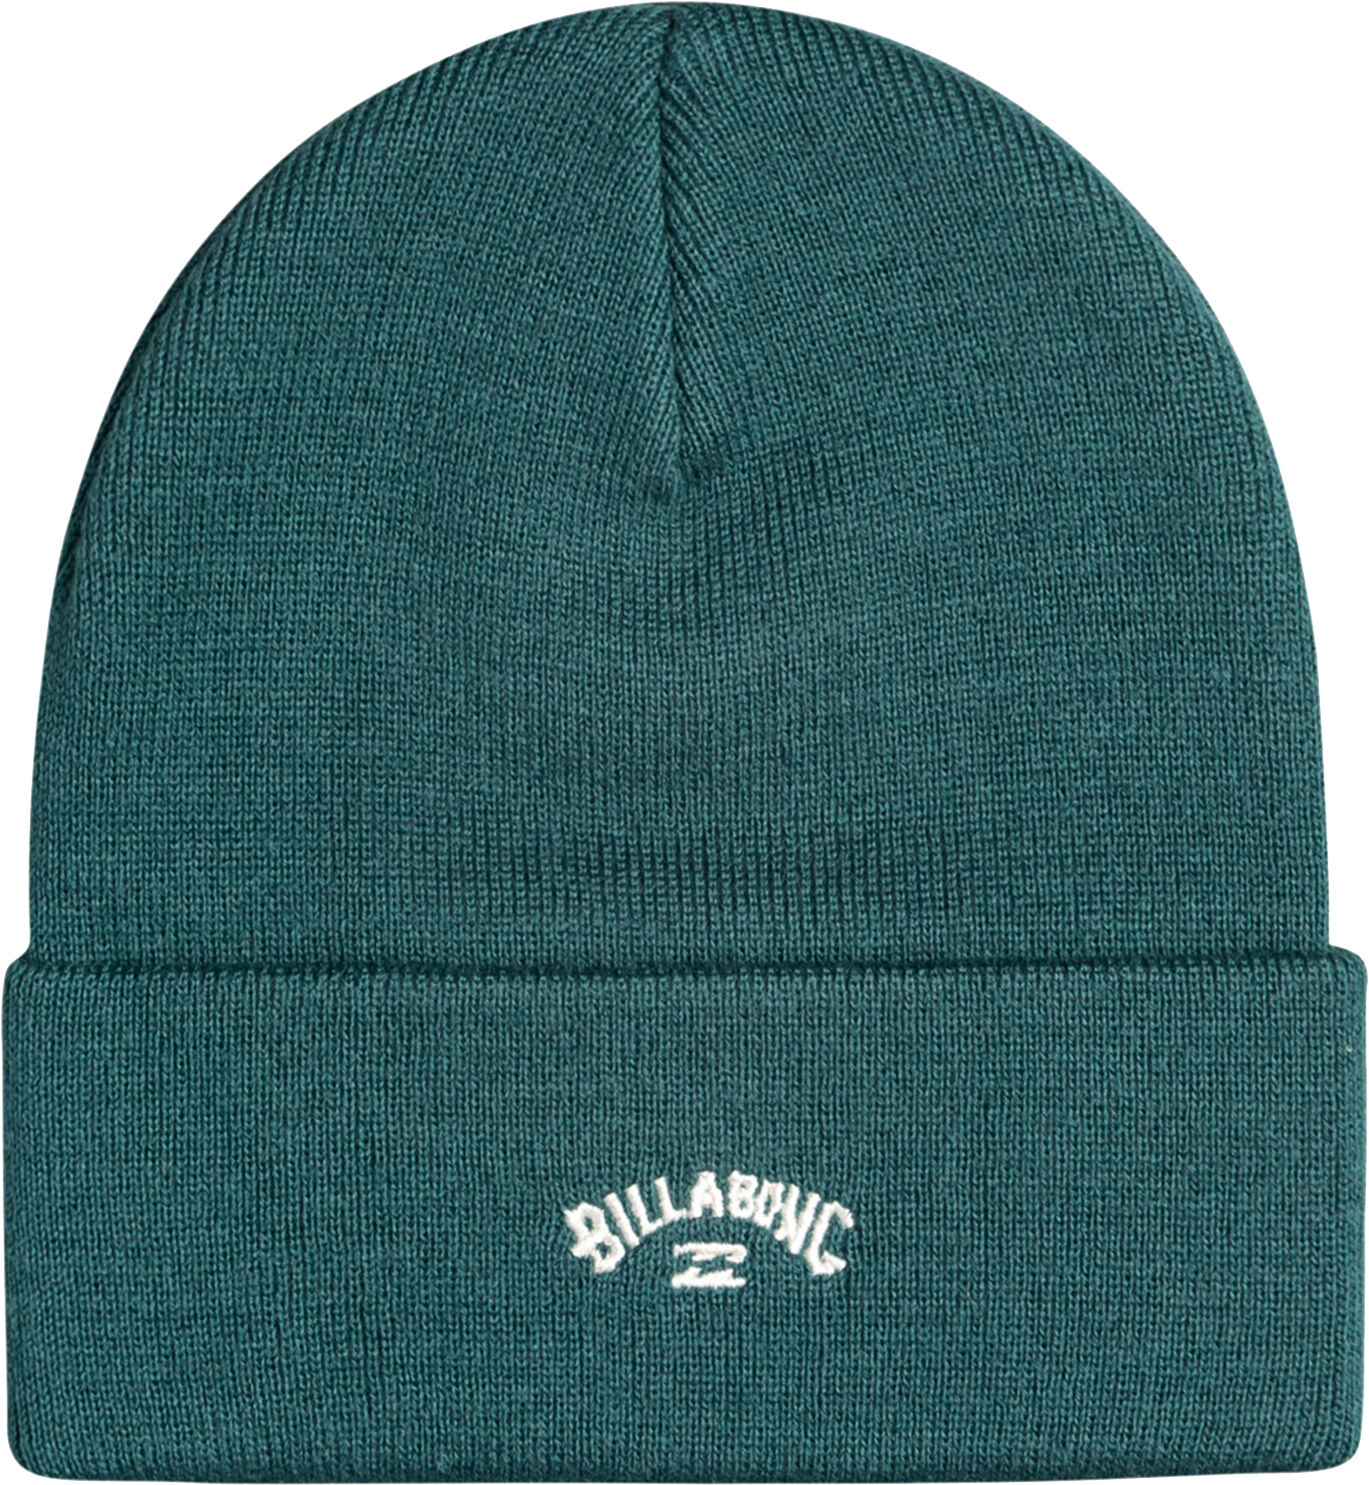 Billabong ARCH BEANIE REAL TEAL One Size